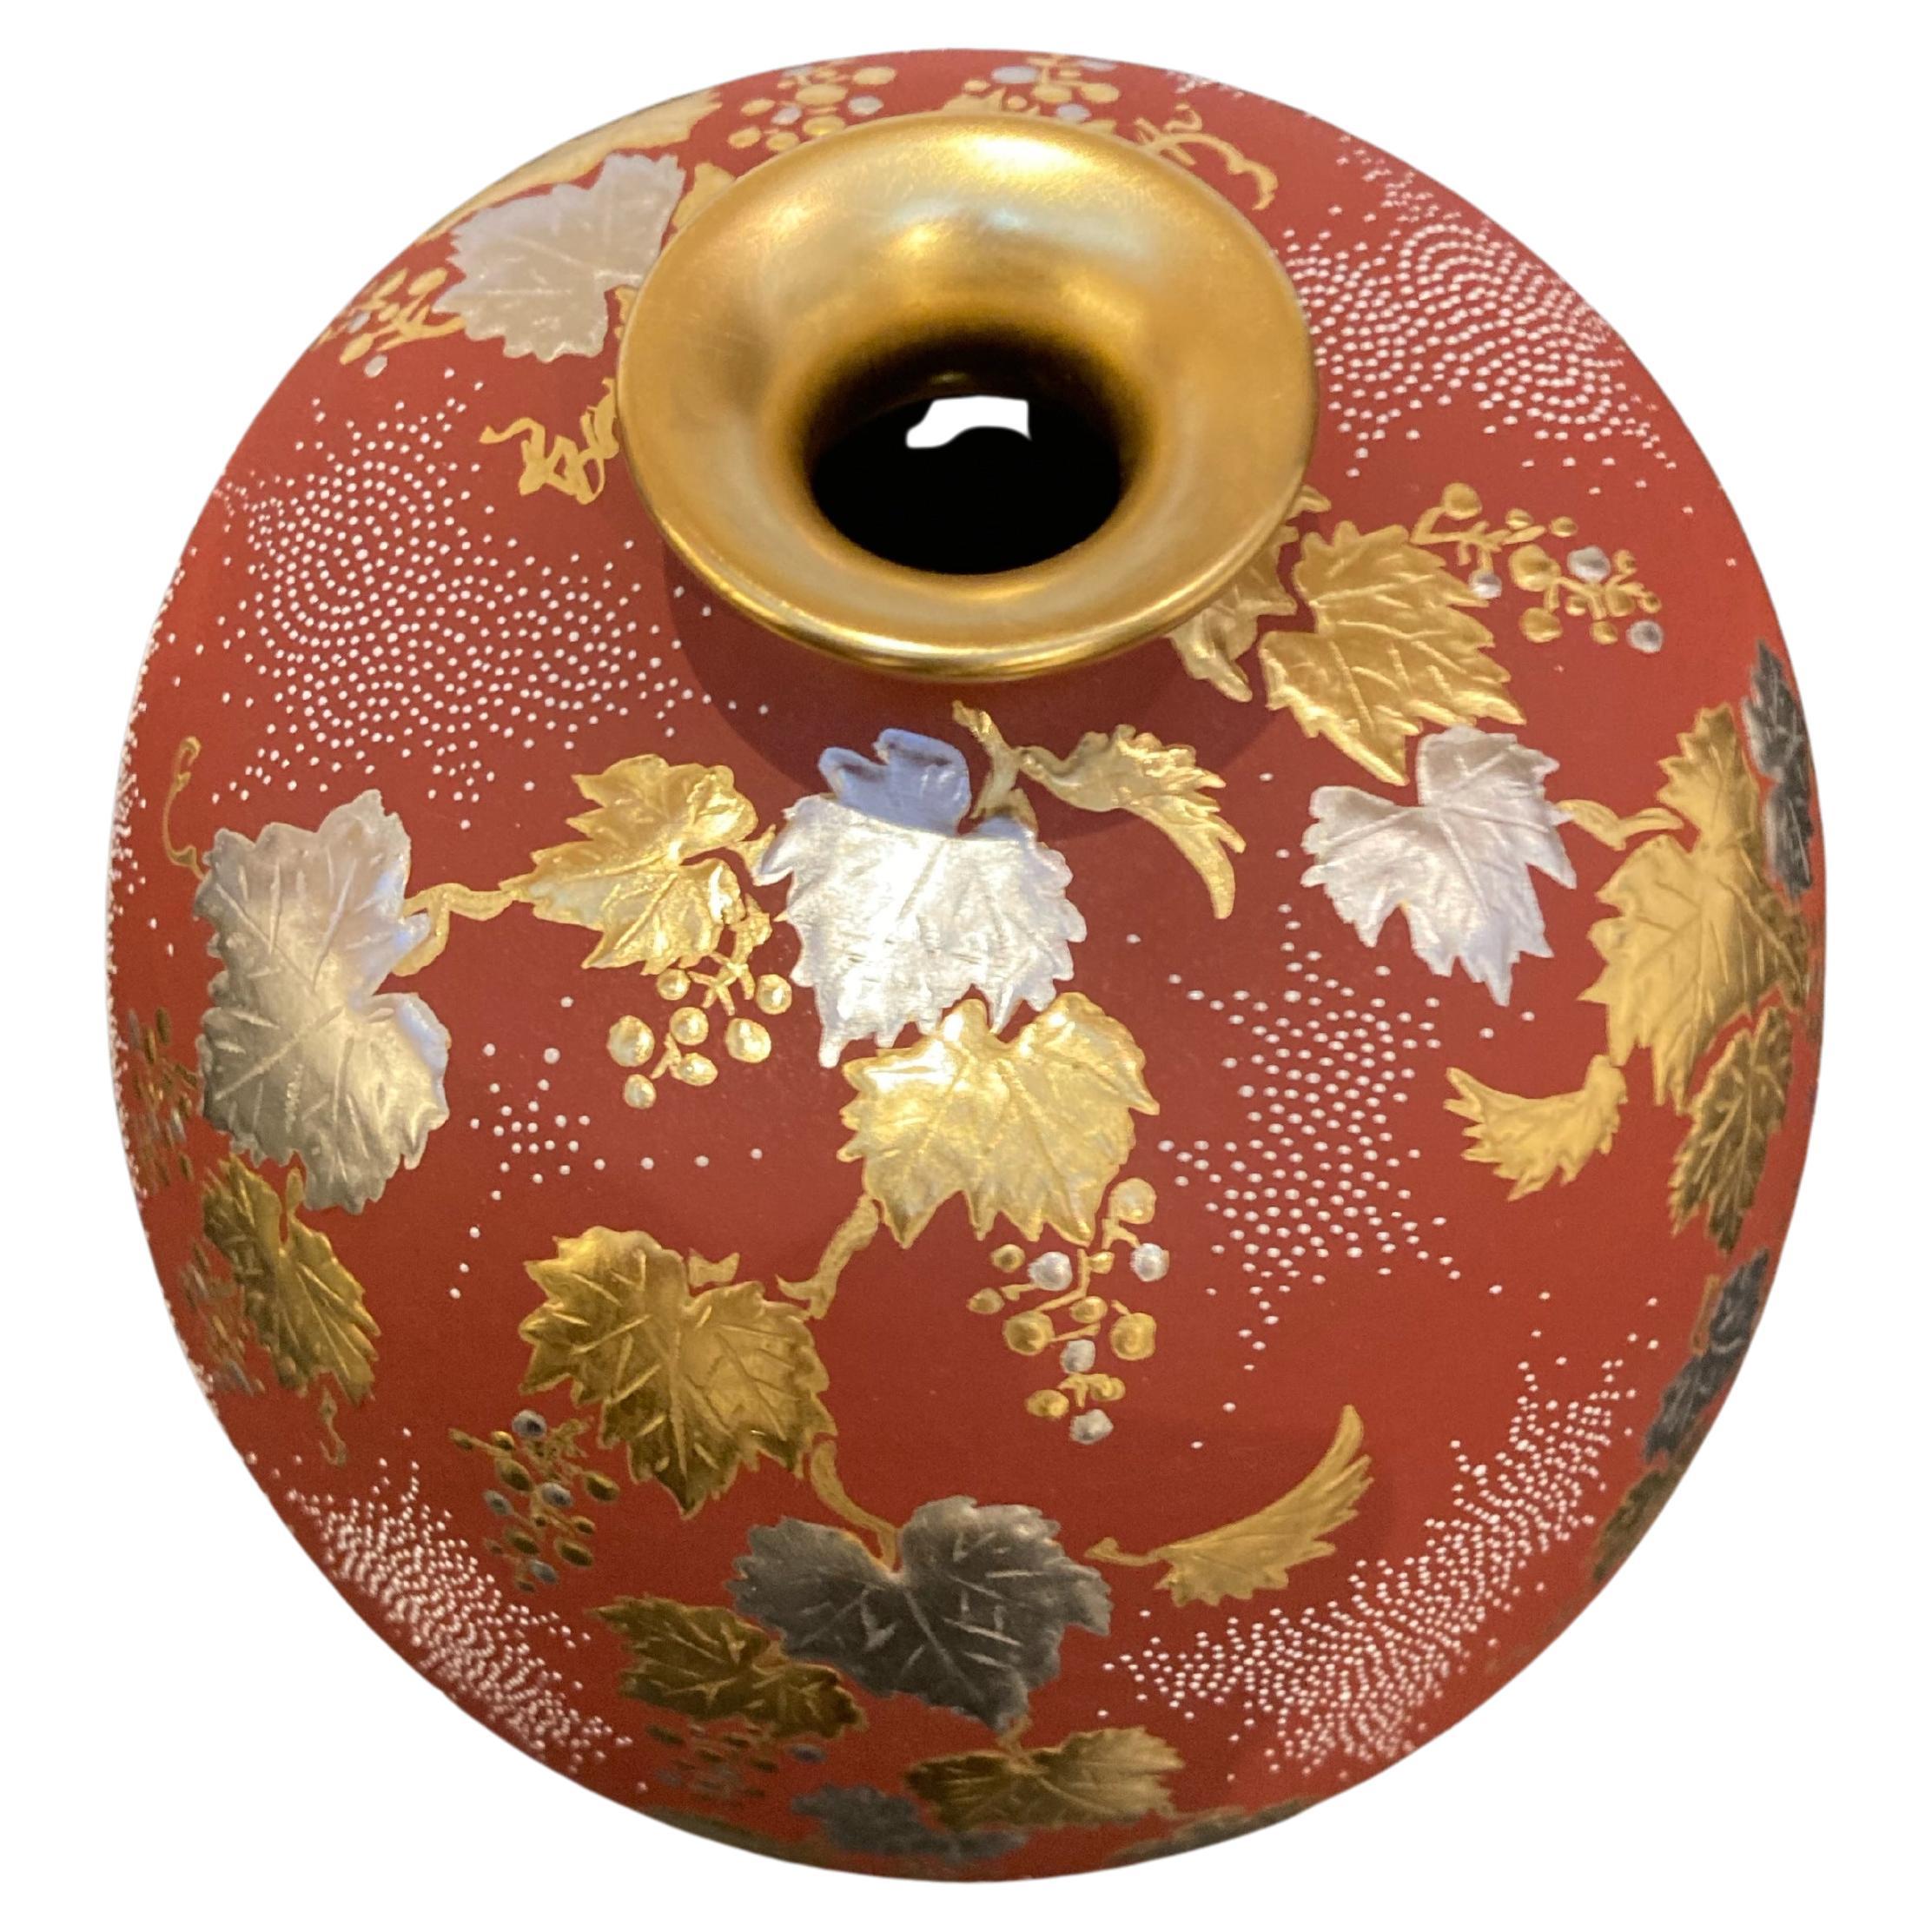 Exquisite contemporary Japanese collectible Kutani porcelain vase, stunningly hand painted with white raised 